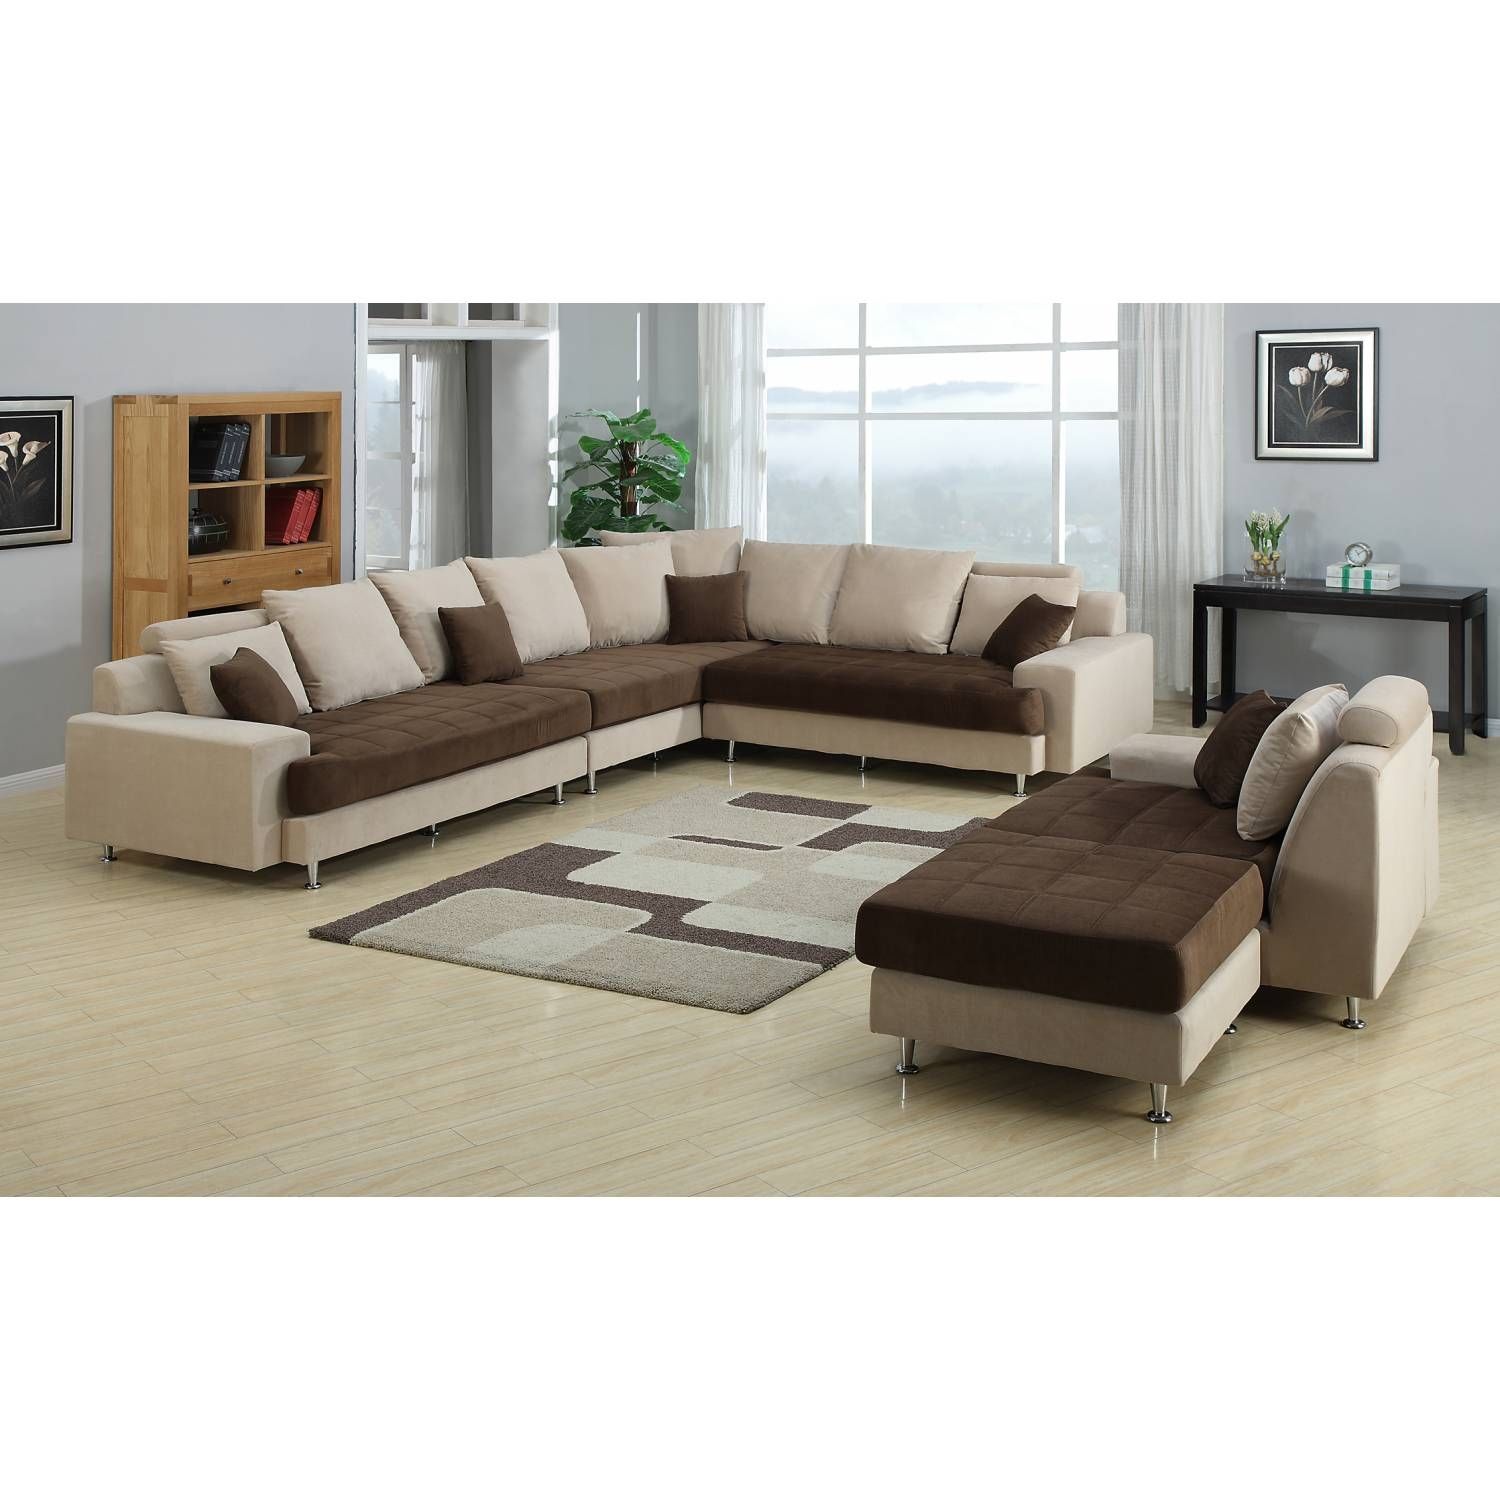 Sectional Sofa With Ottoman – Foter Within 2 Tone Chocolate Microfiber Sofas (View 15 of 15)